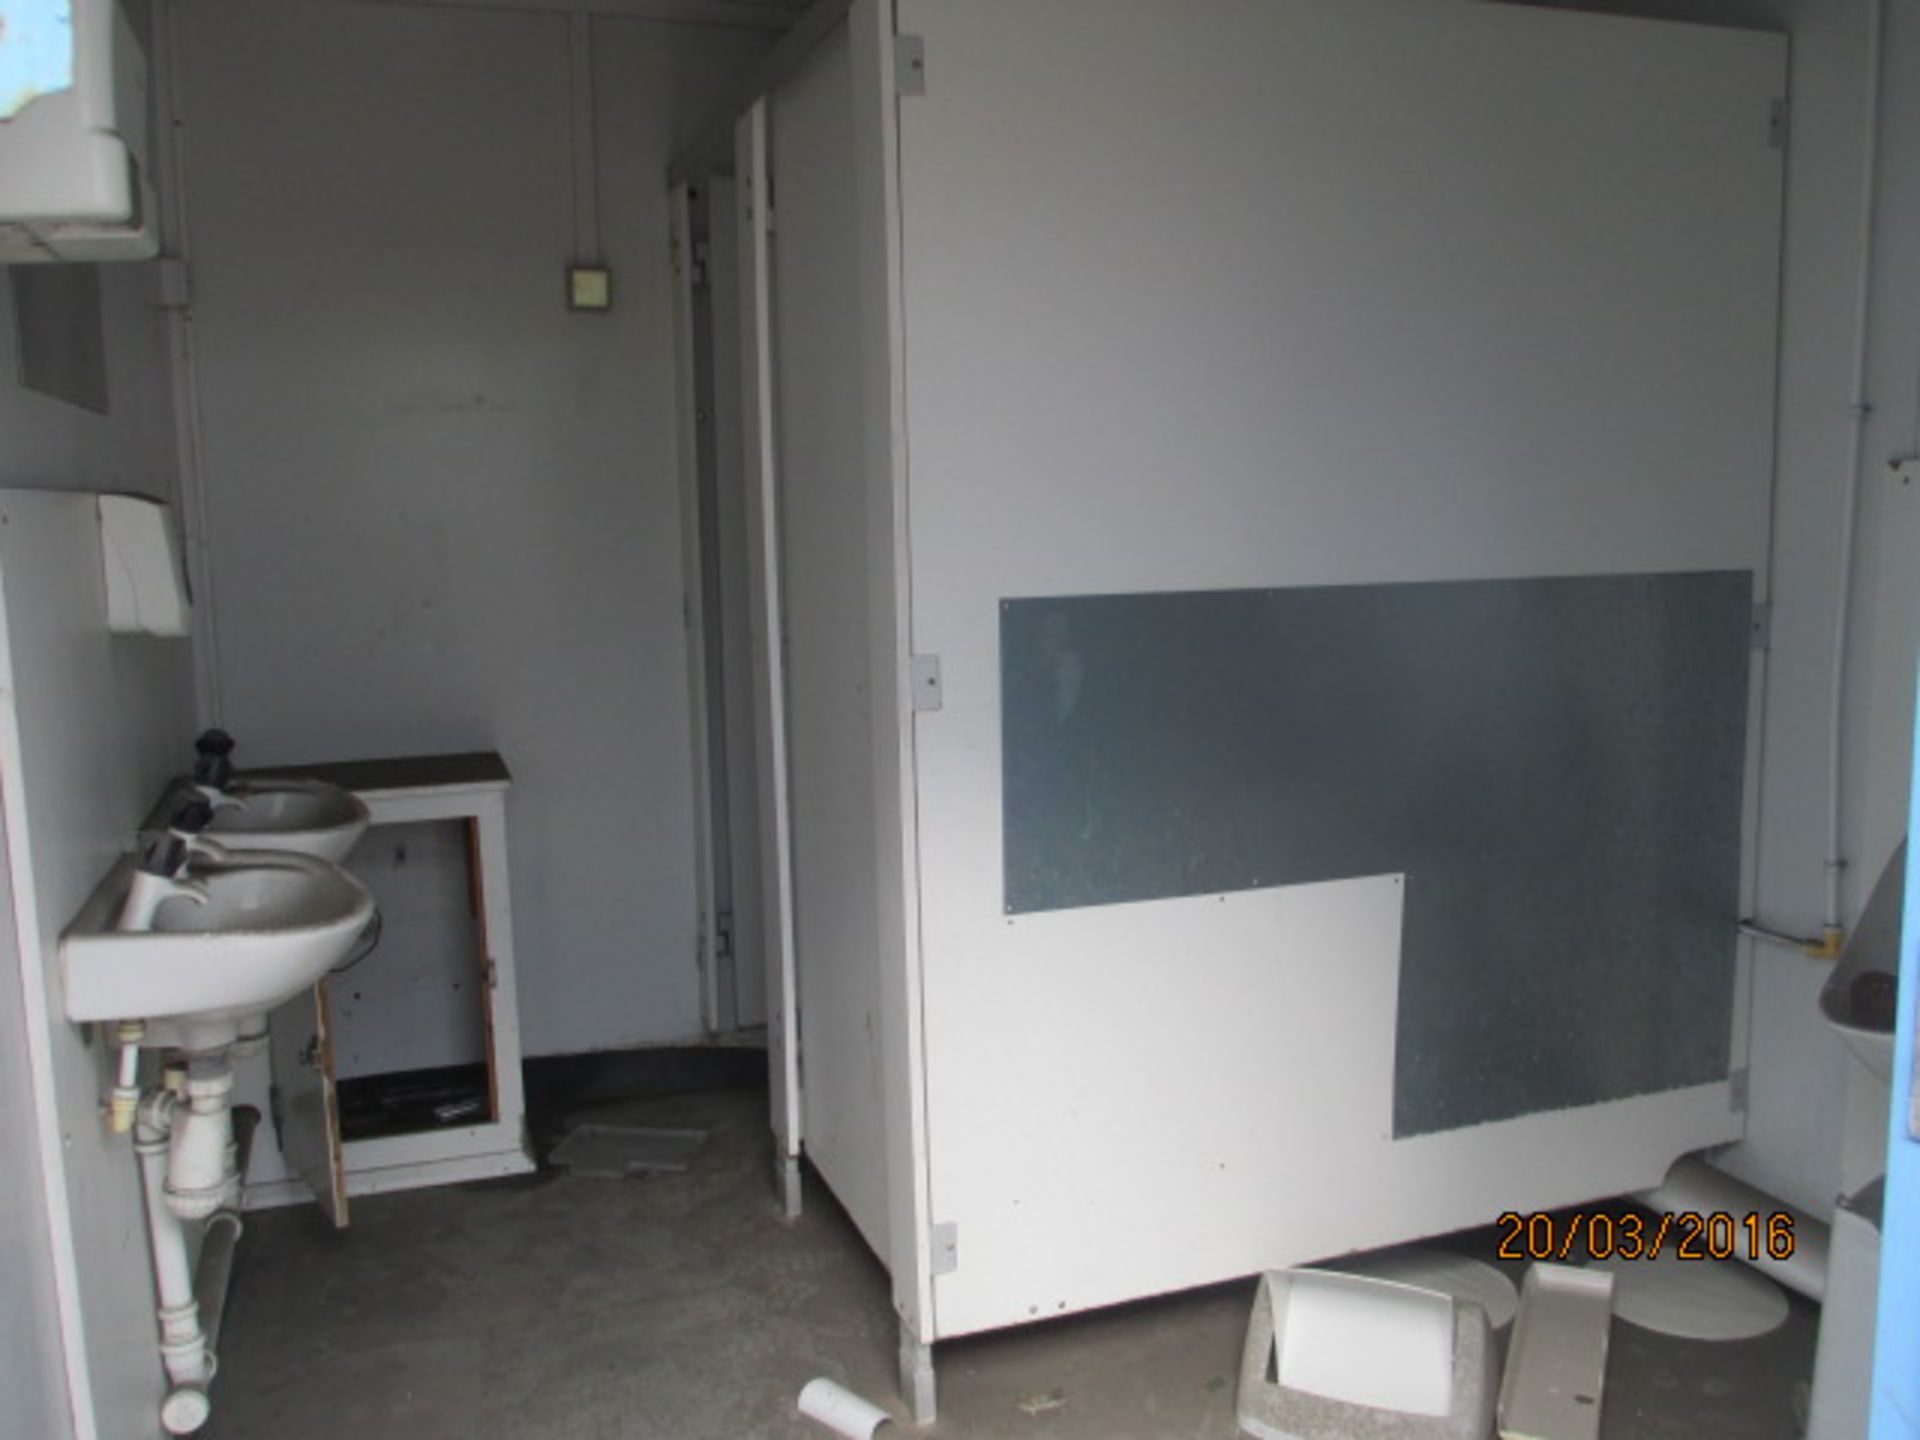 E30276 20X8 STEELCLAD - TOILET - Image 6 of 7